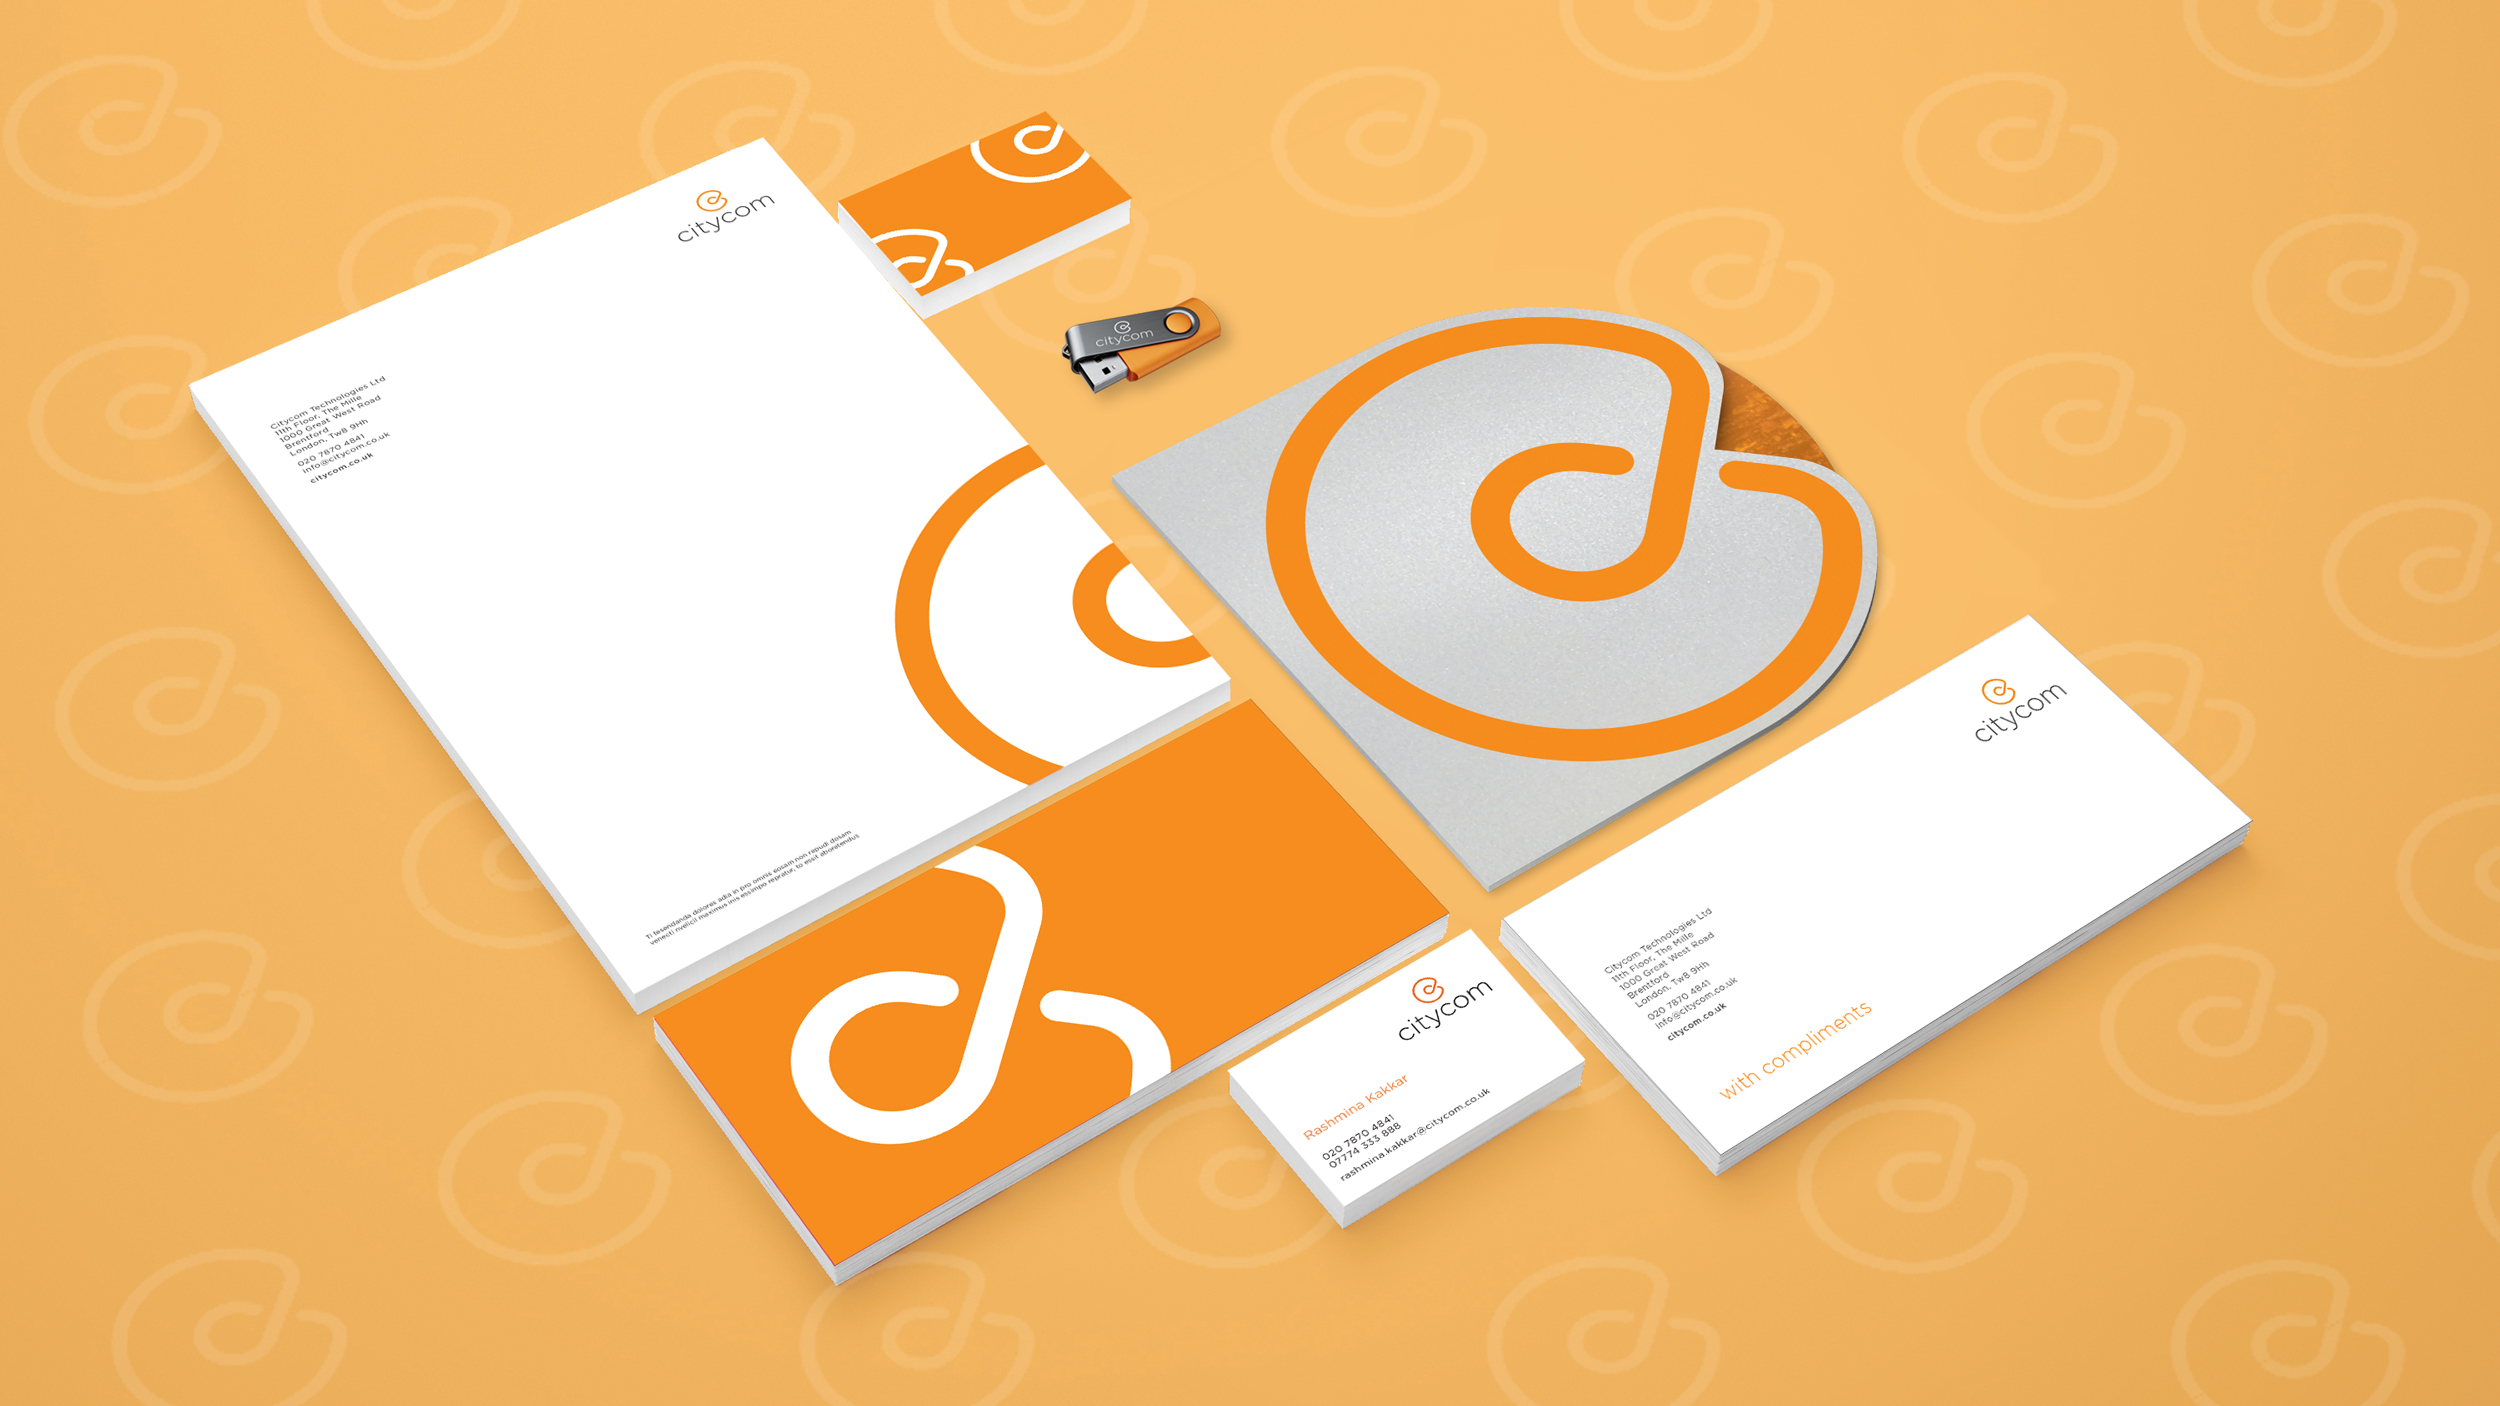 Bespoke stationery including business cards, letterheads and a welcome pack designed for Citycom